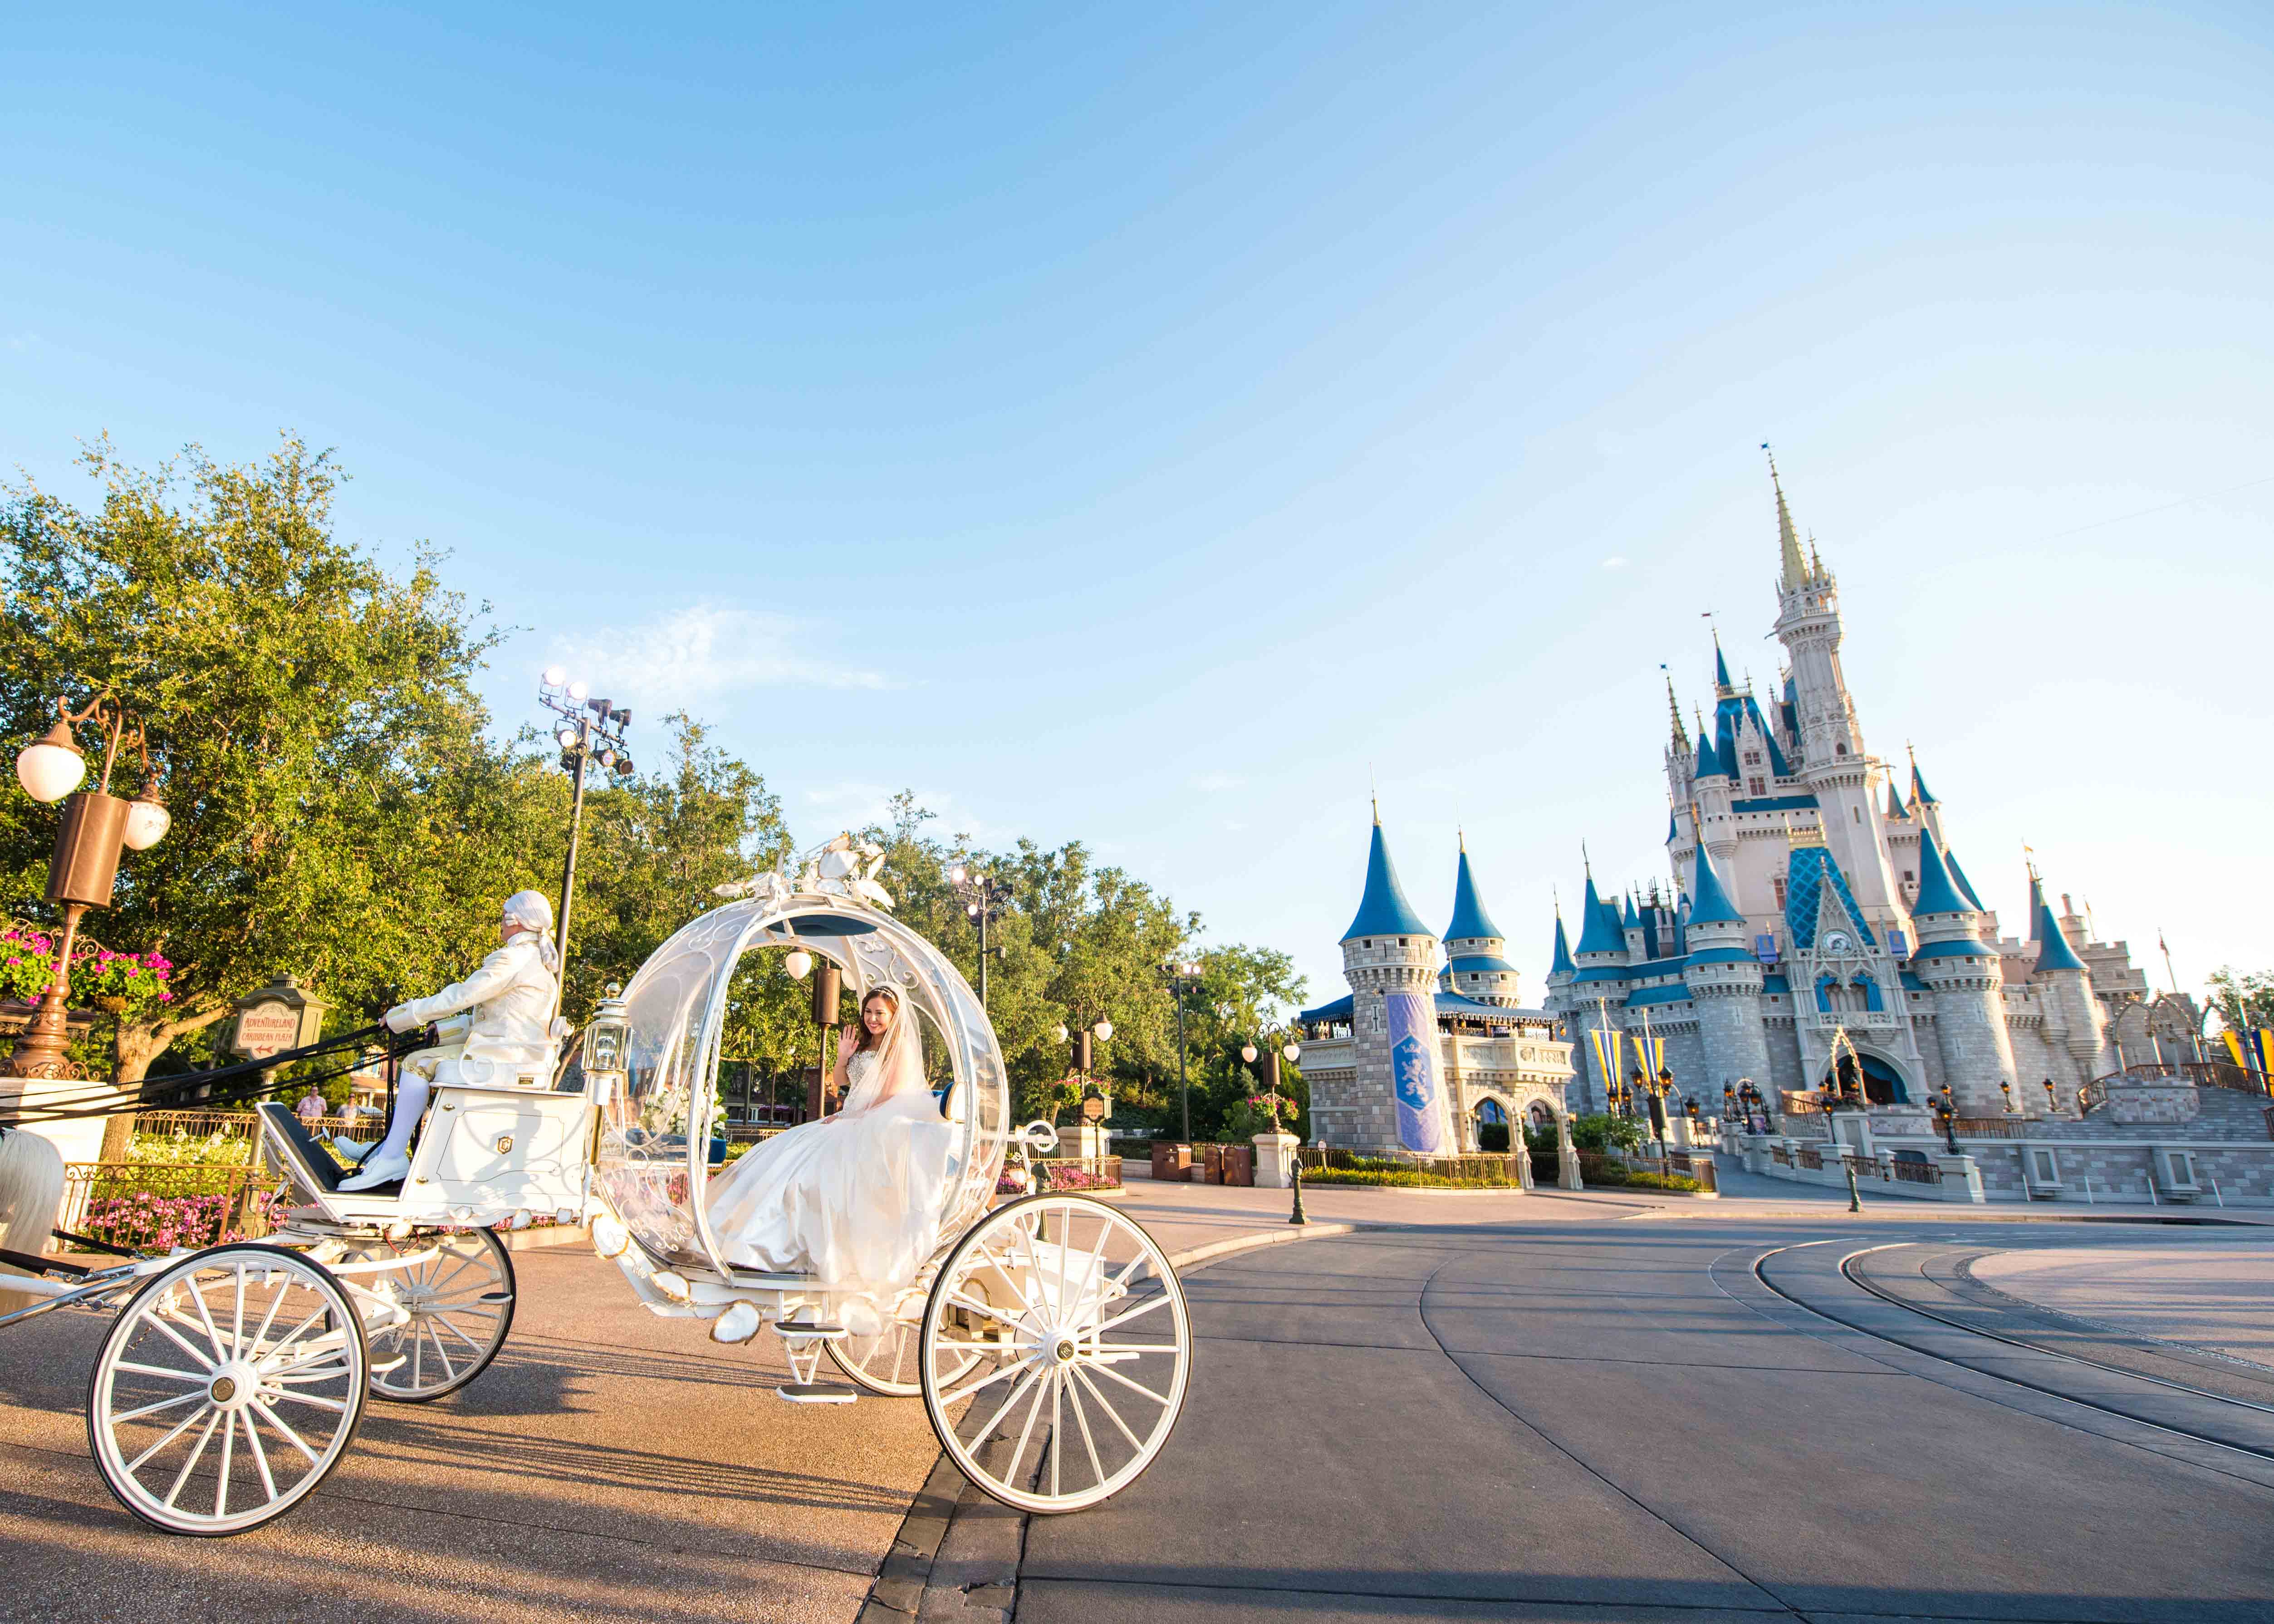 can you enter disney magic kingdom extra hours pass before 7pm